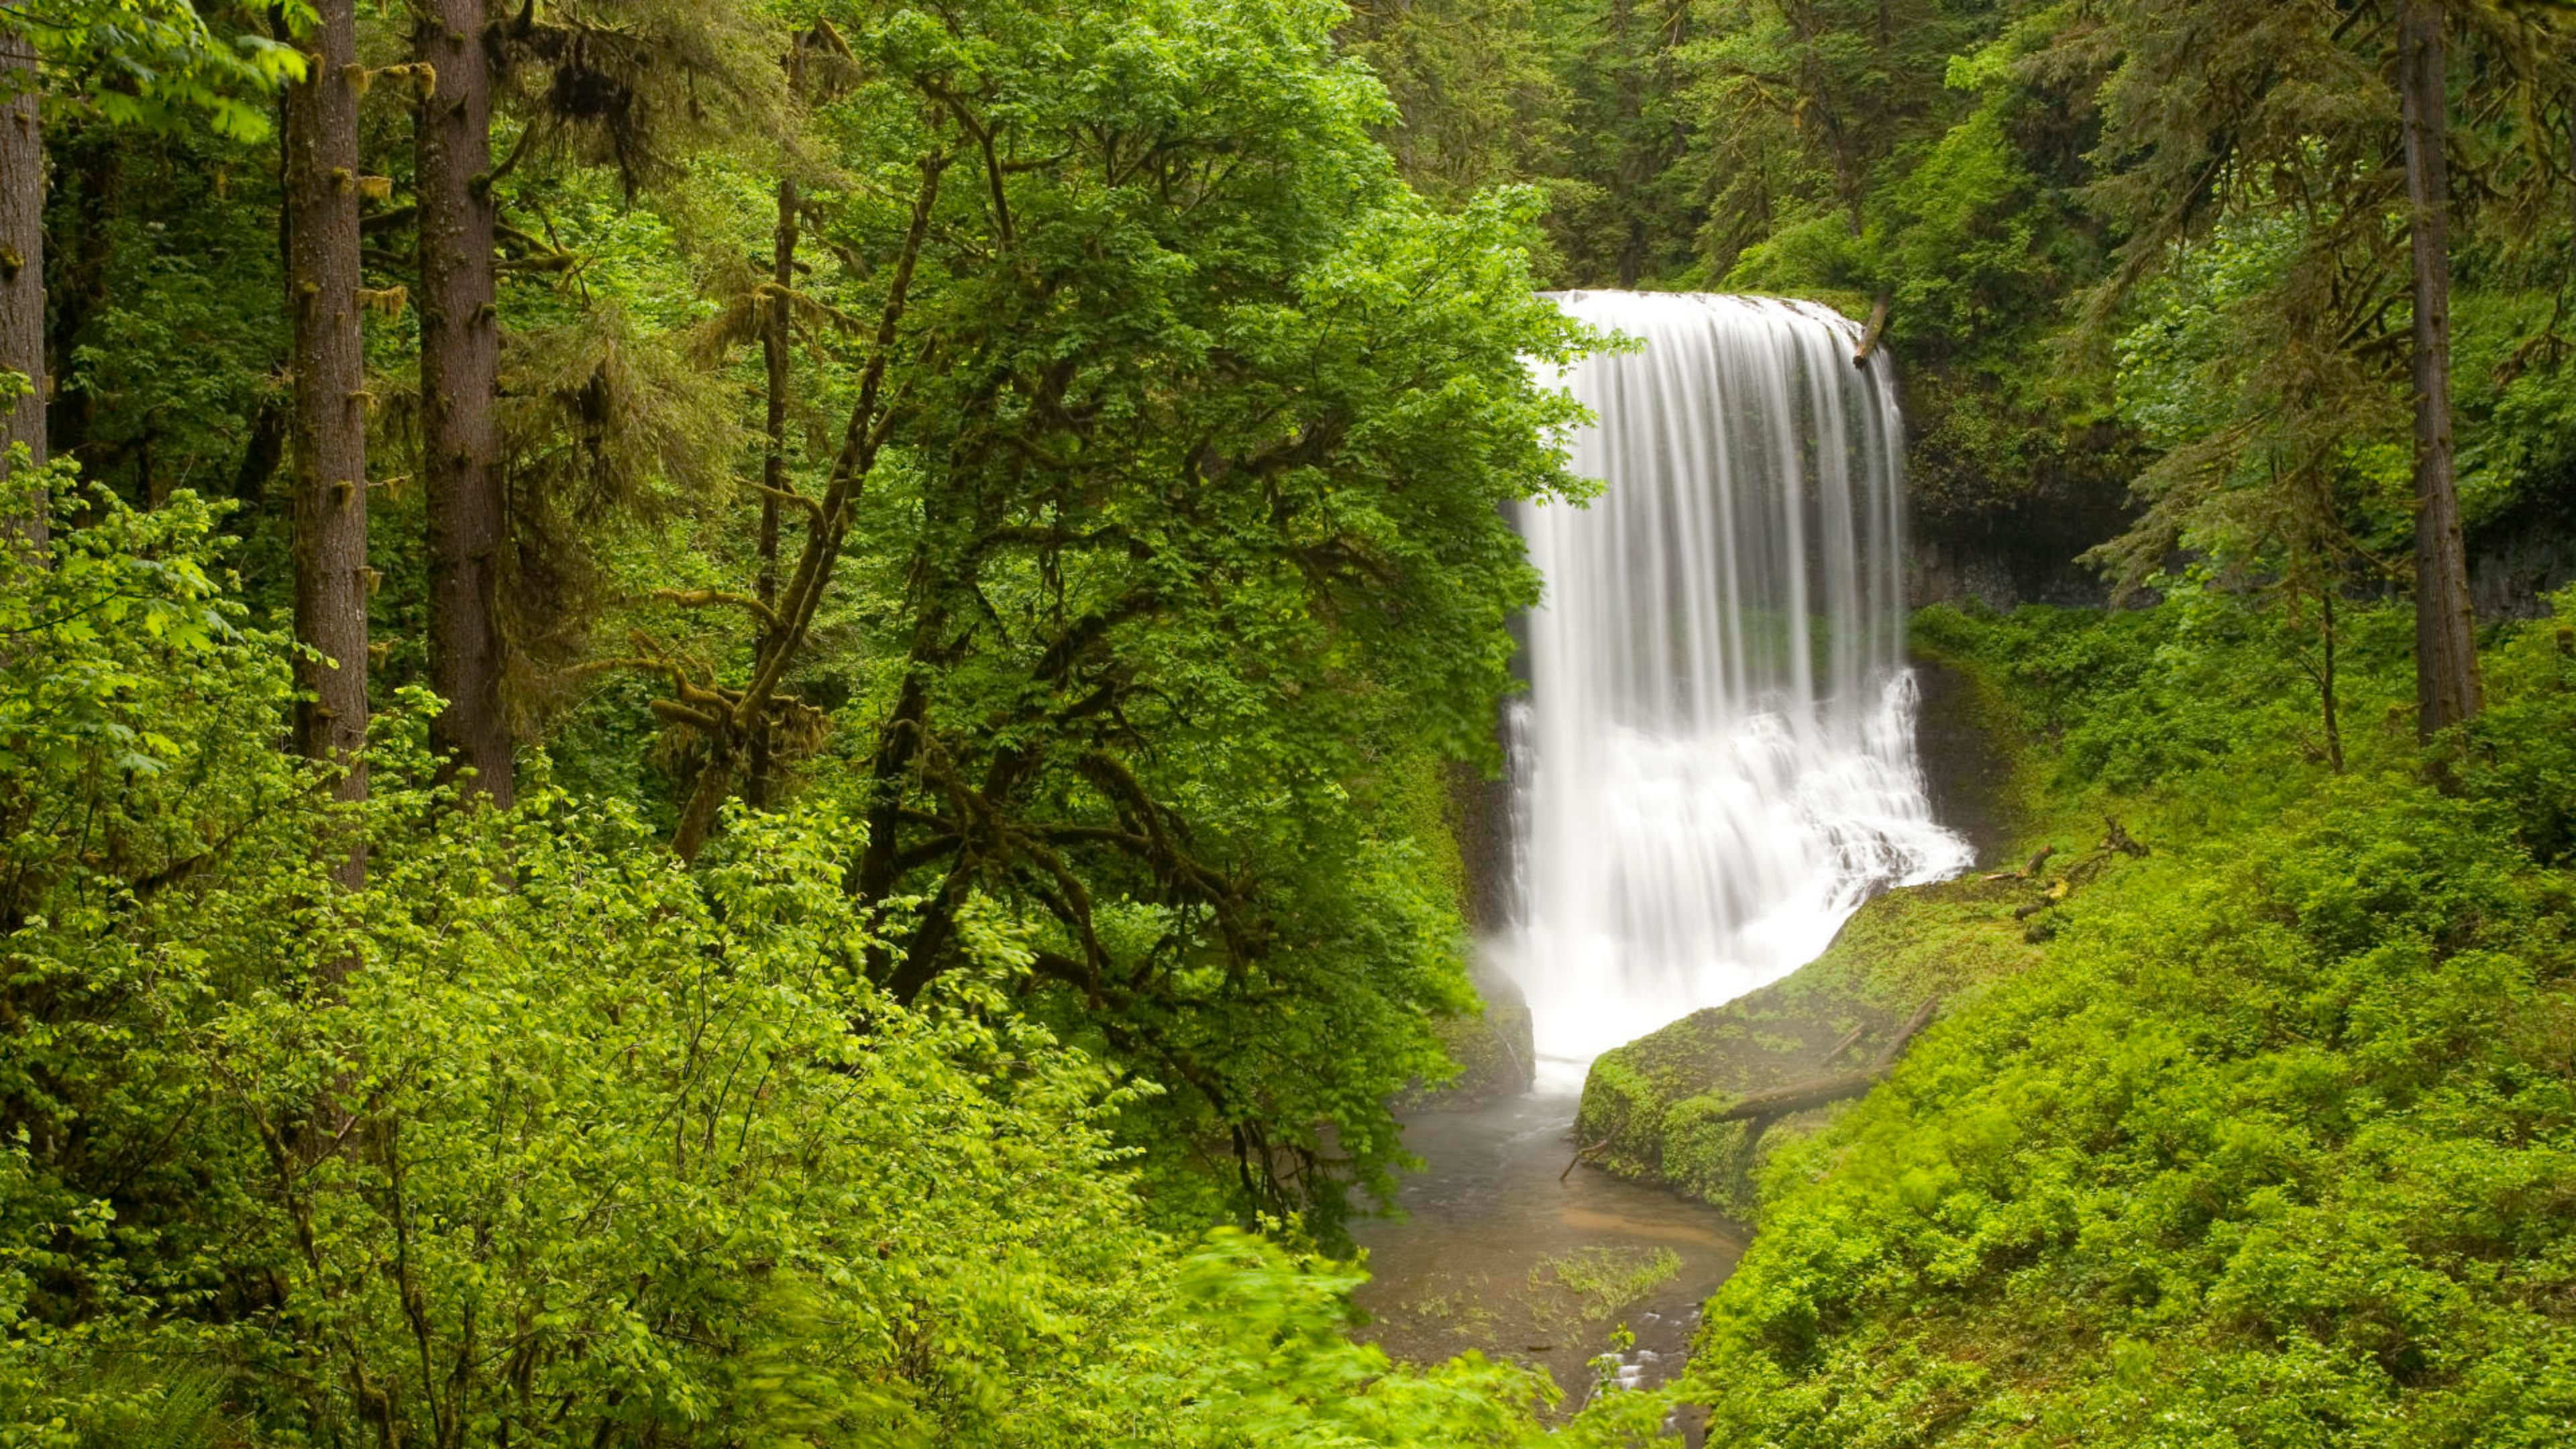 Spring Landscape Nature Waterfall Forest With Green Trees Oregon State